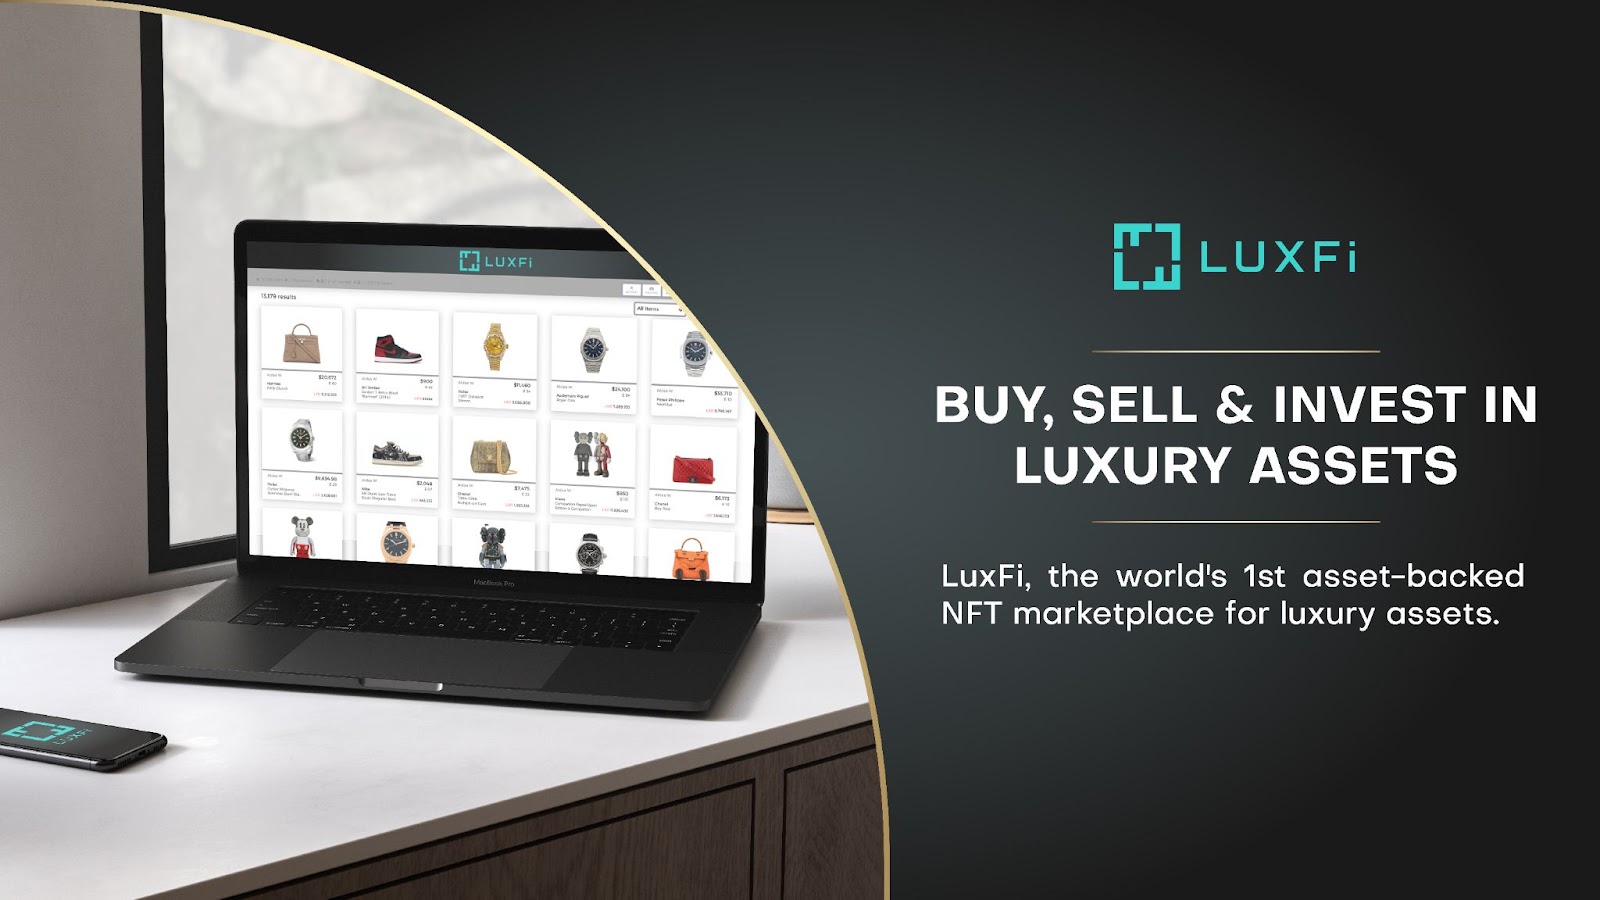 How to Invest in LuxFi – the Luxury Asset-Backed NFT Marketplace